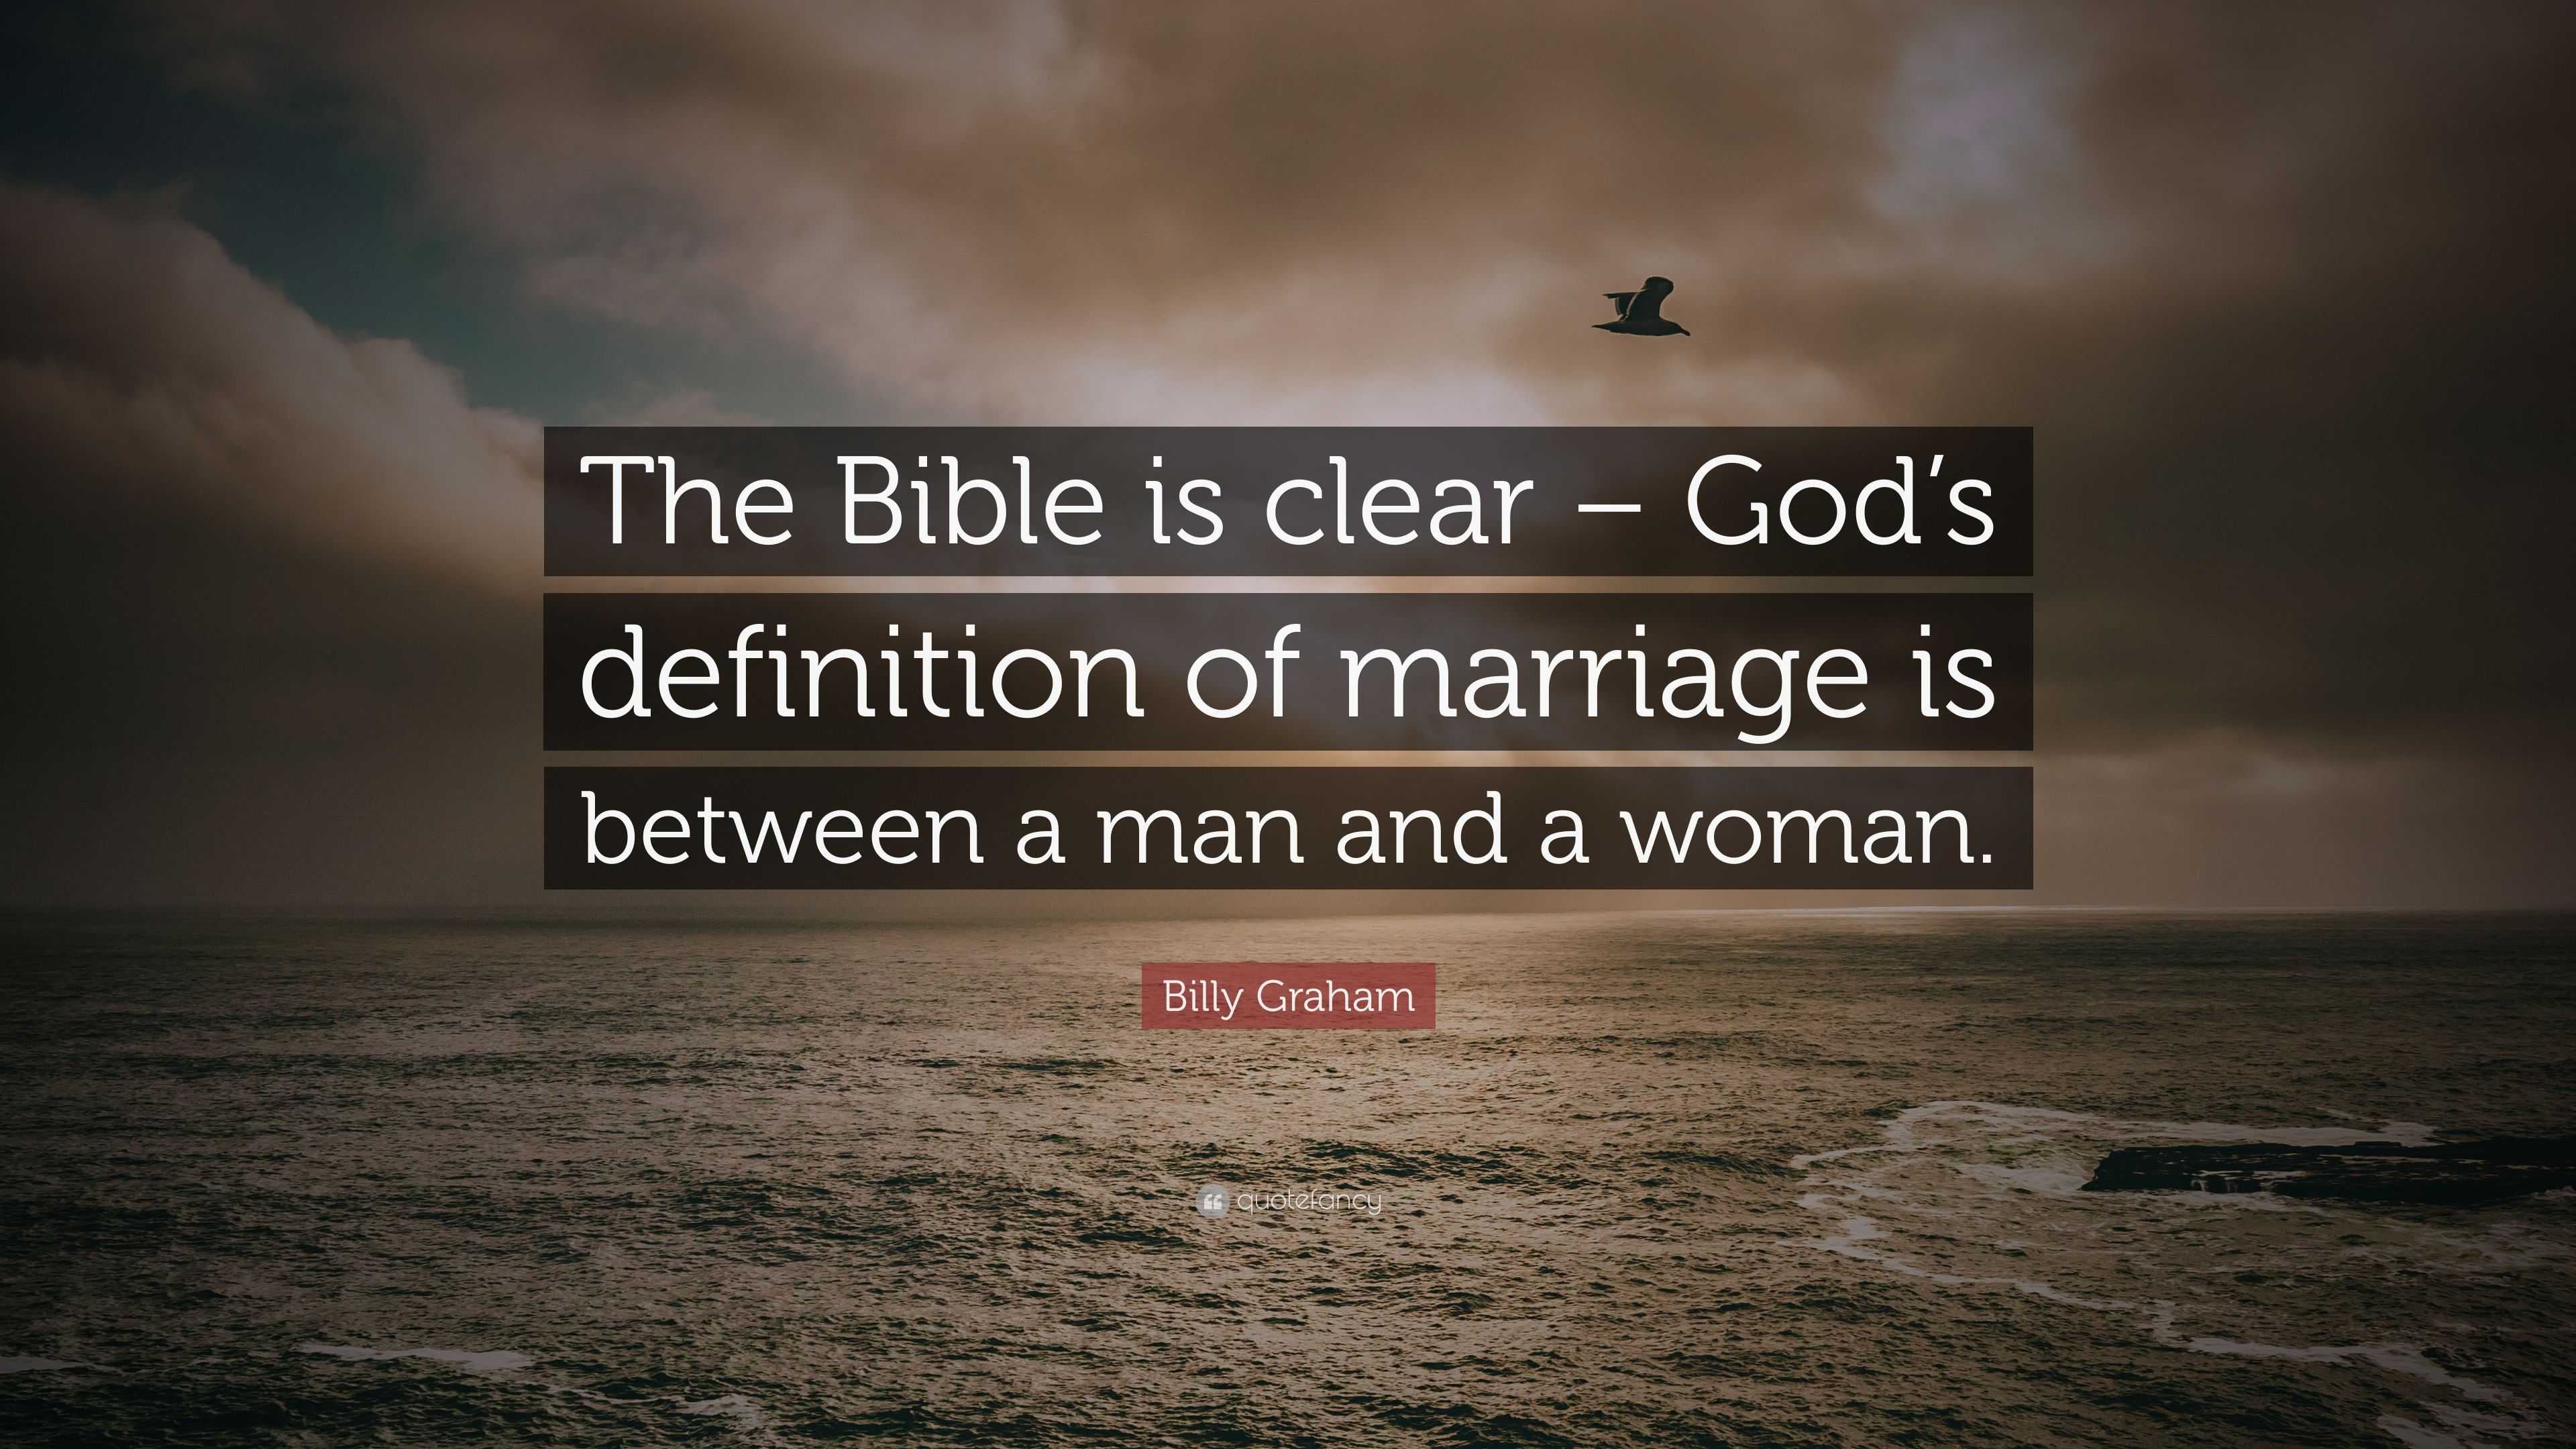 billy graham quote: “the bible is clear – god's definition of